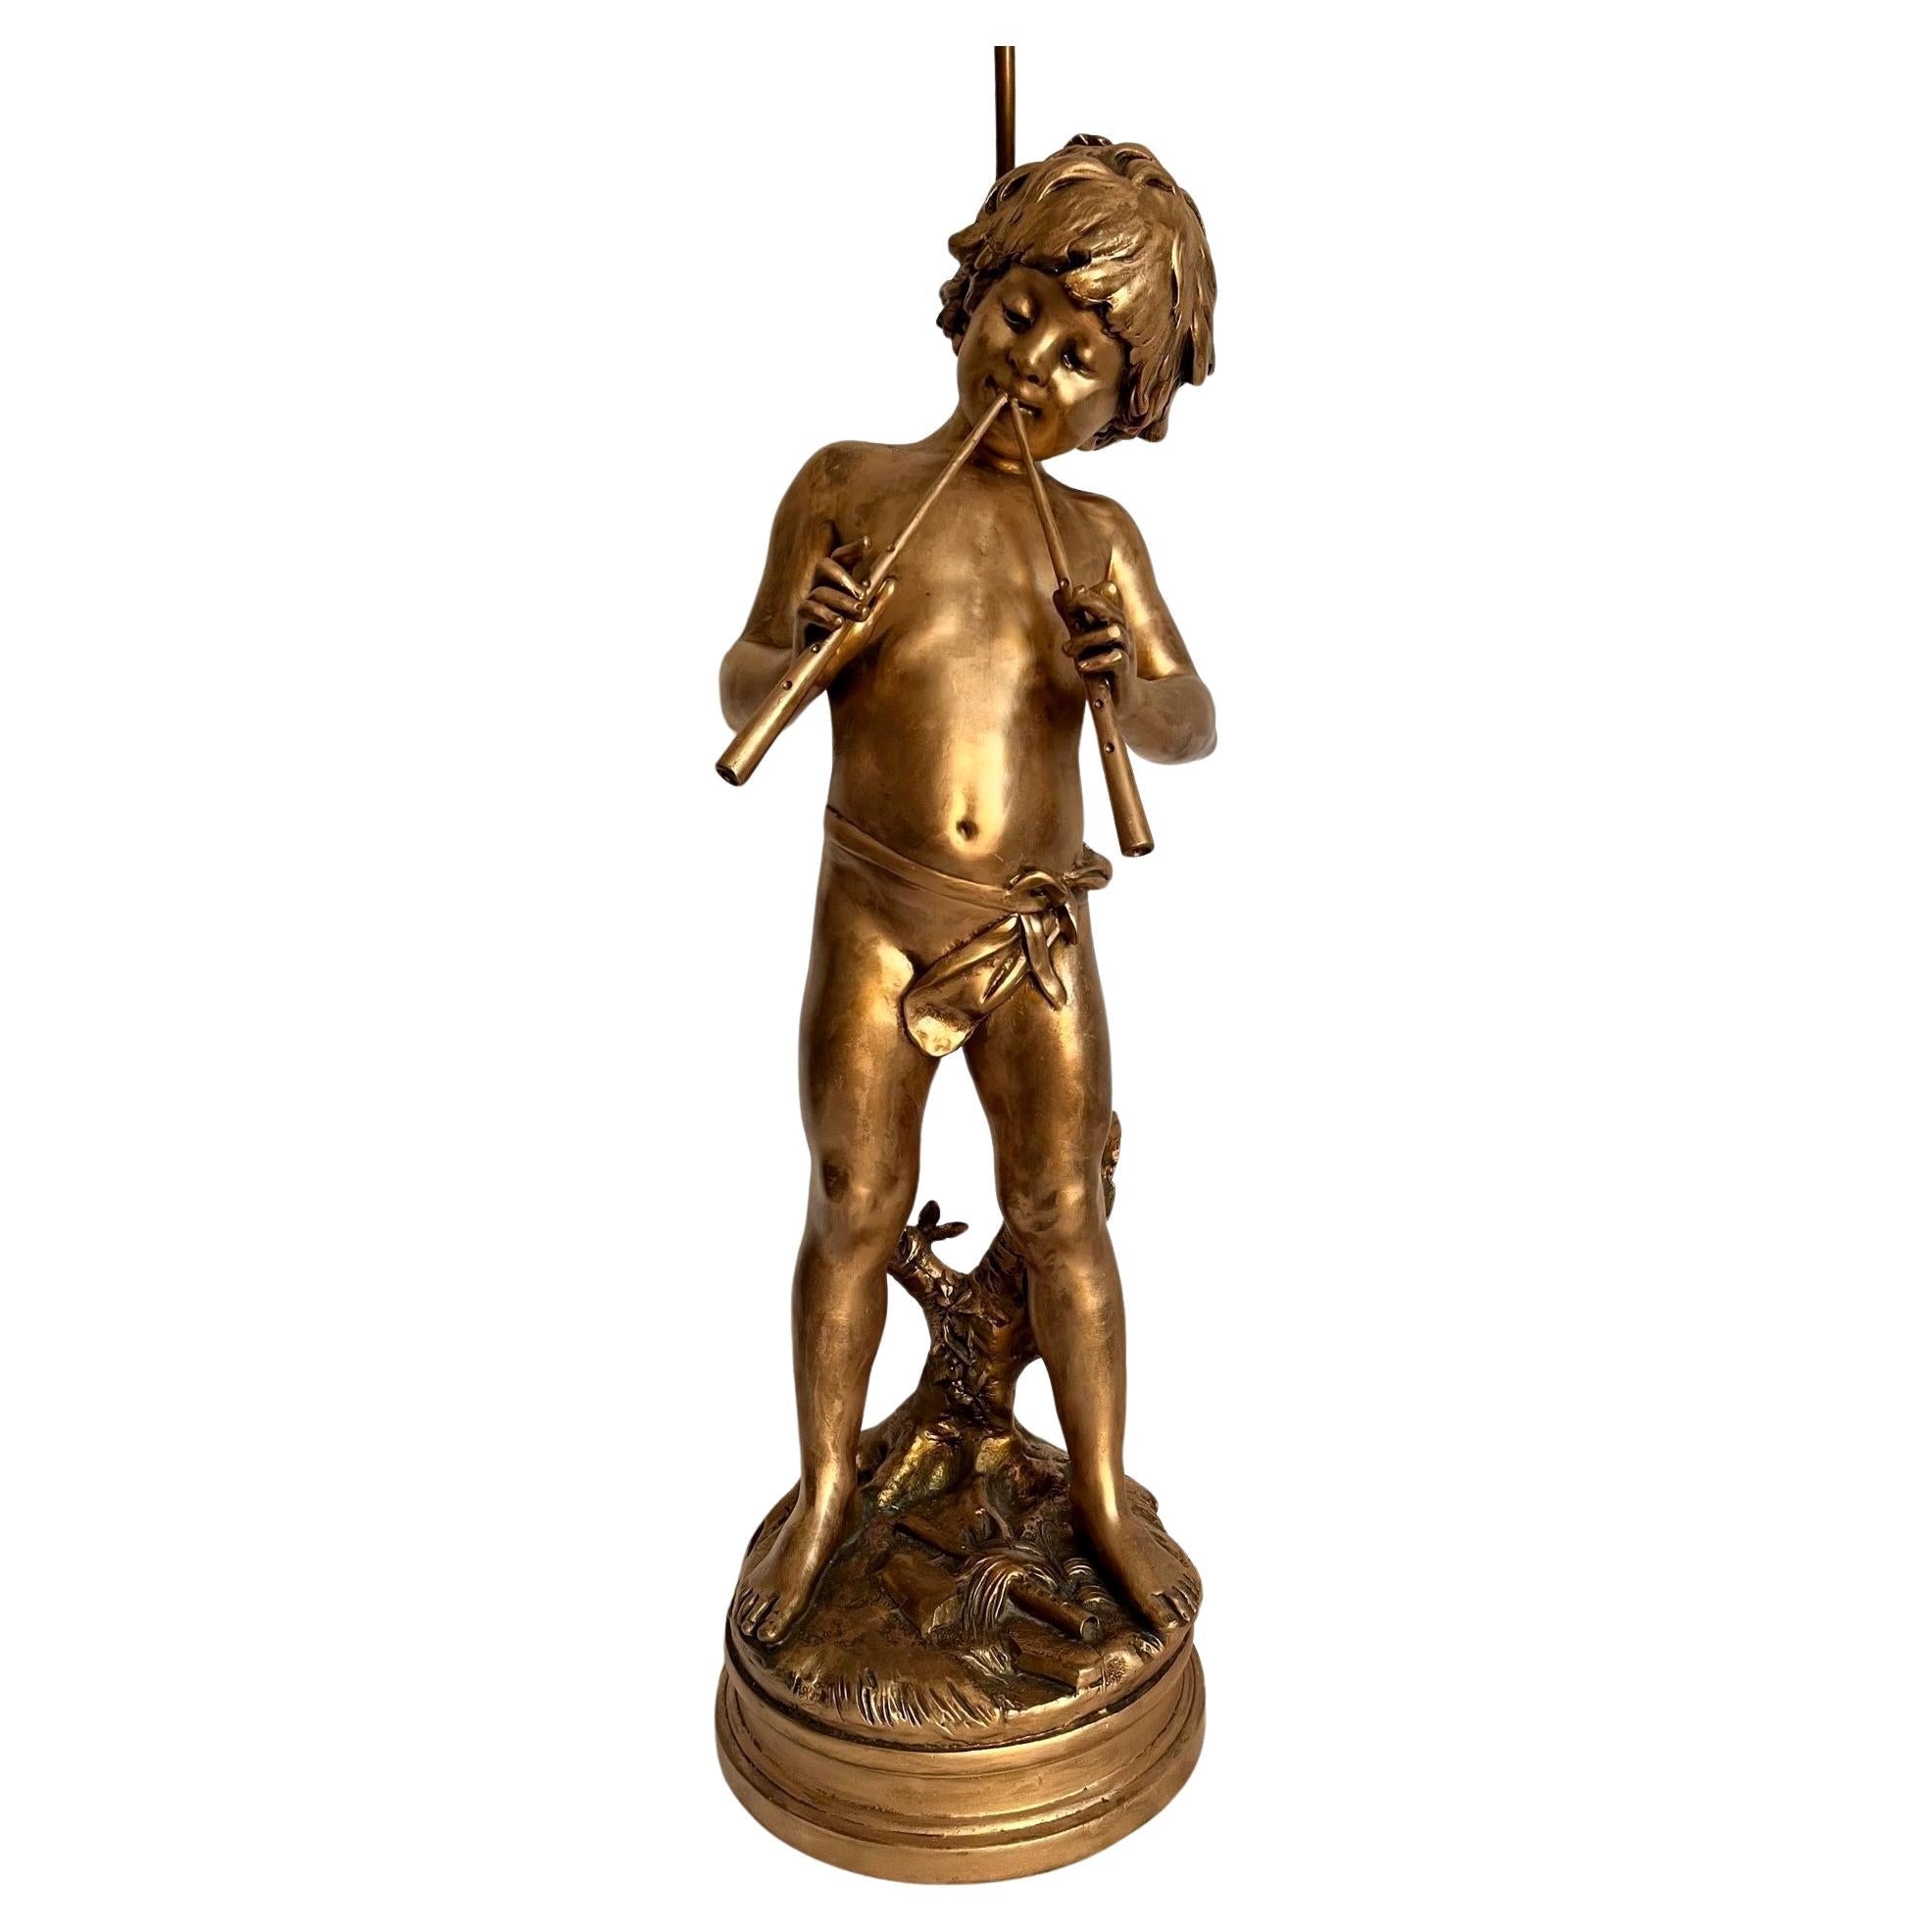 19th Century French Gilt Bronzed Lamp Sculpture “Boy with Flute”, Signed Moreau.